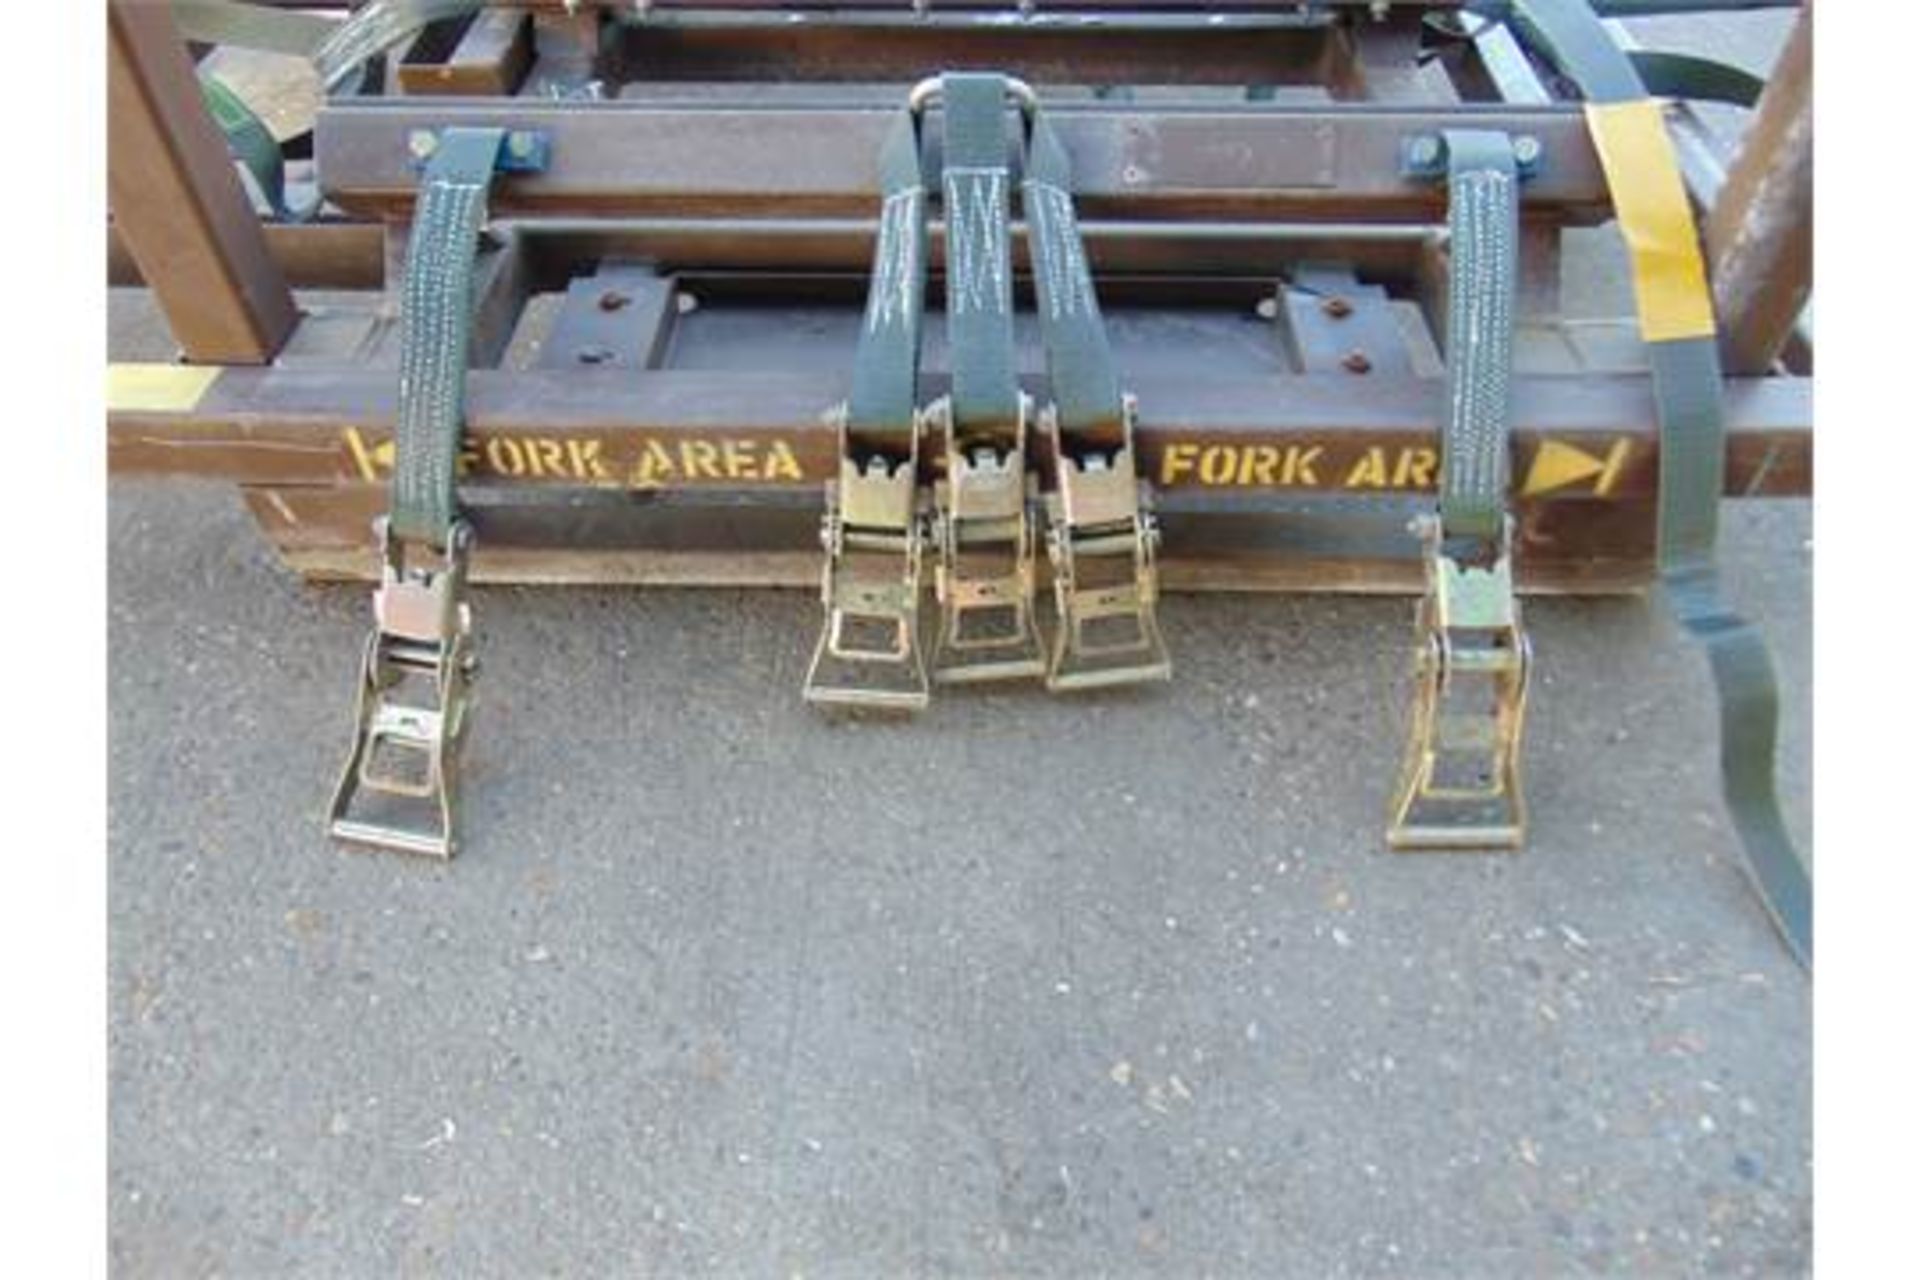 2 x A1047 Mk 3 Stacking Armament / Bomb Pallets with Webbing - Image 6 of 11